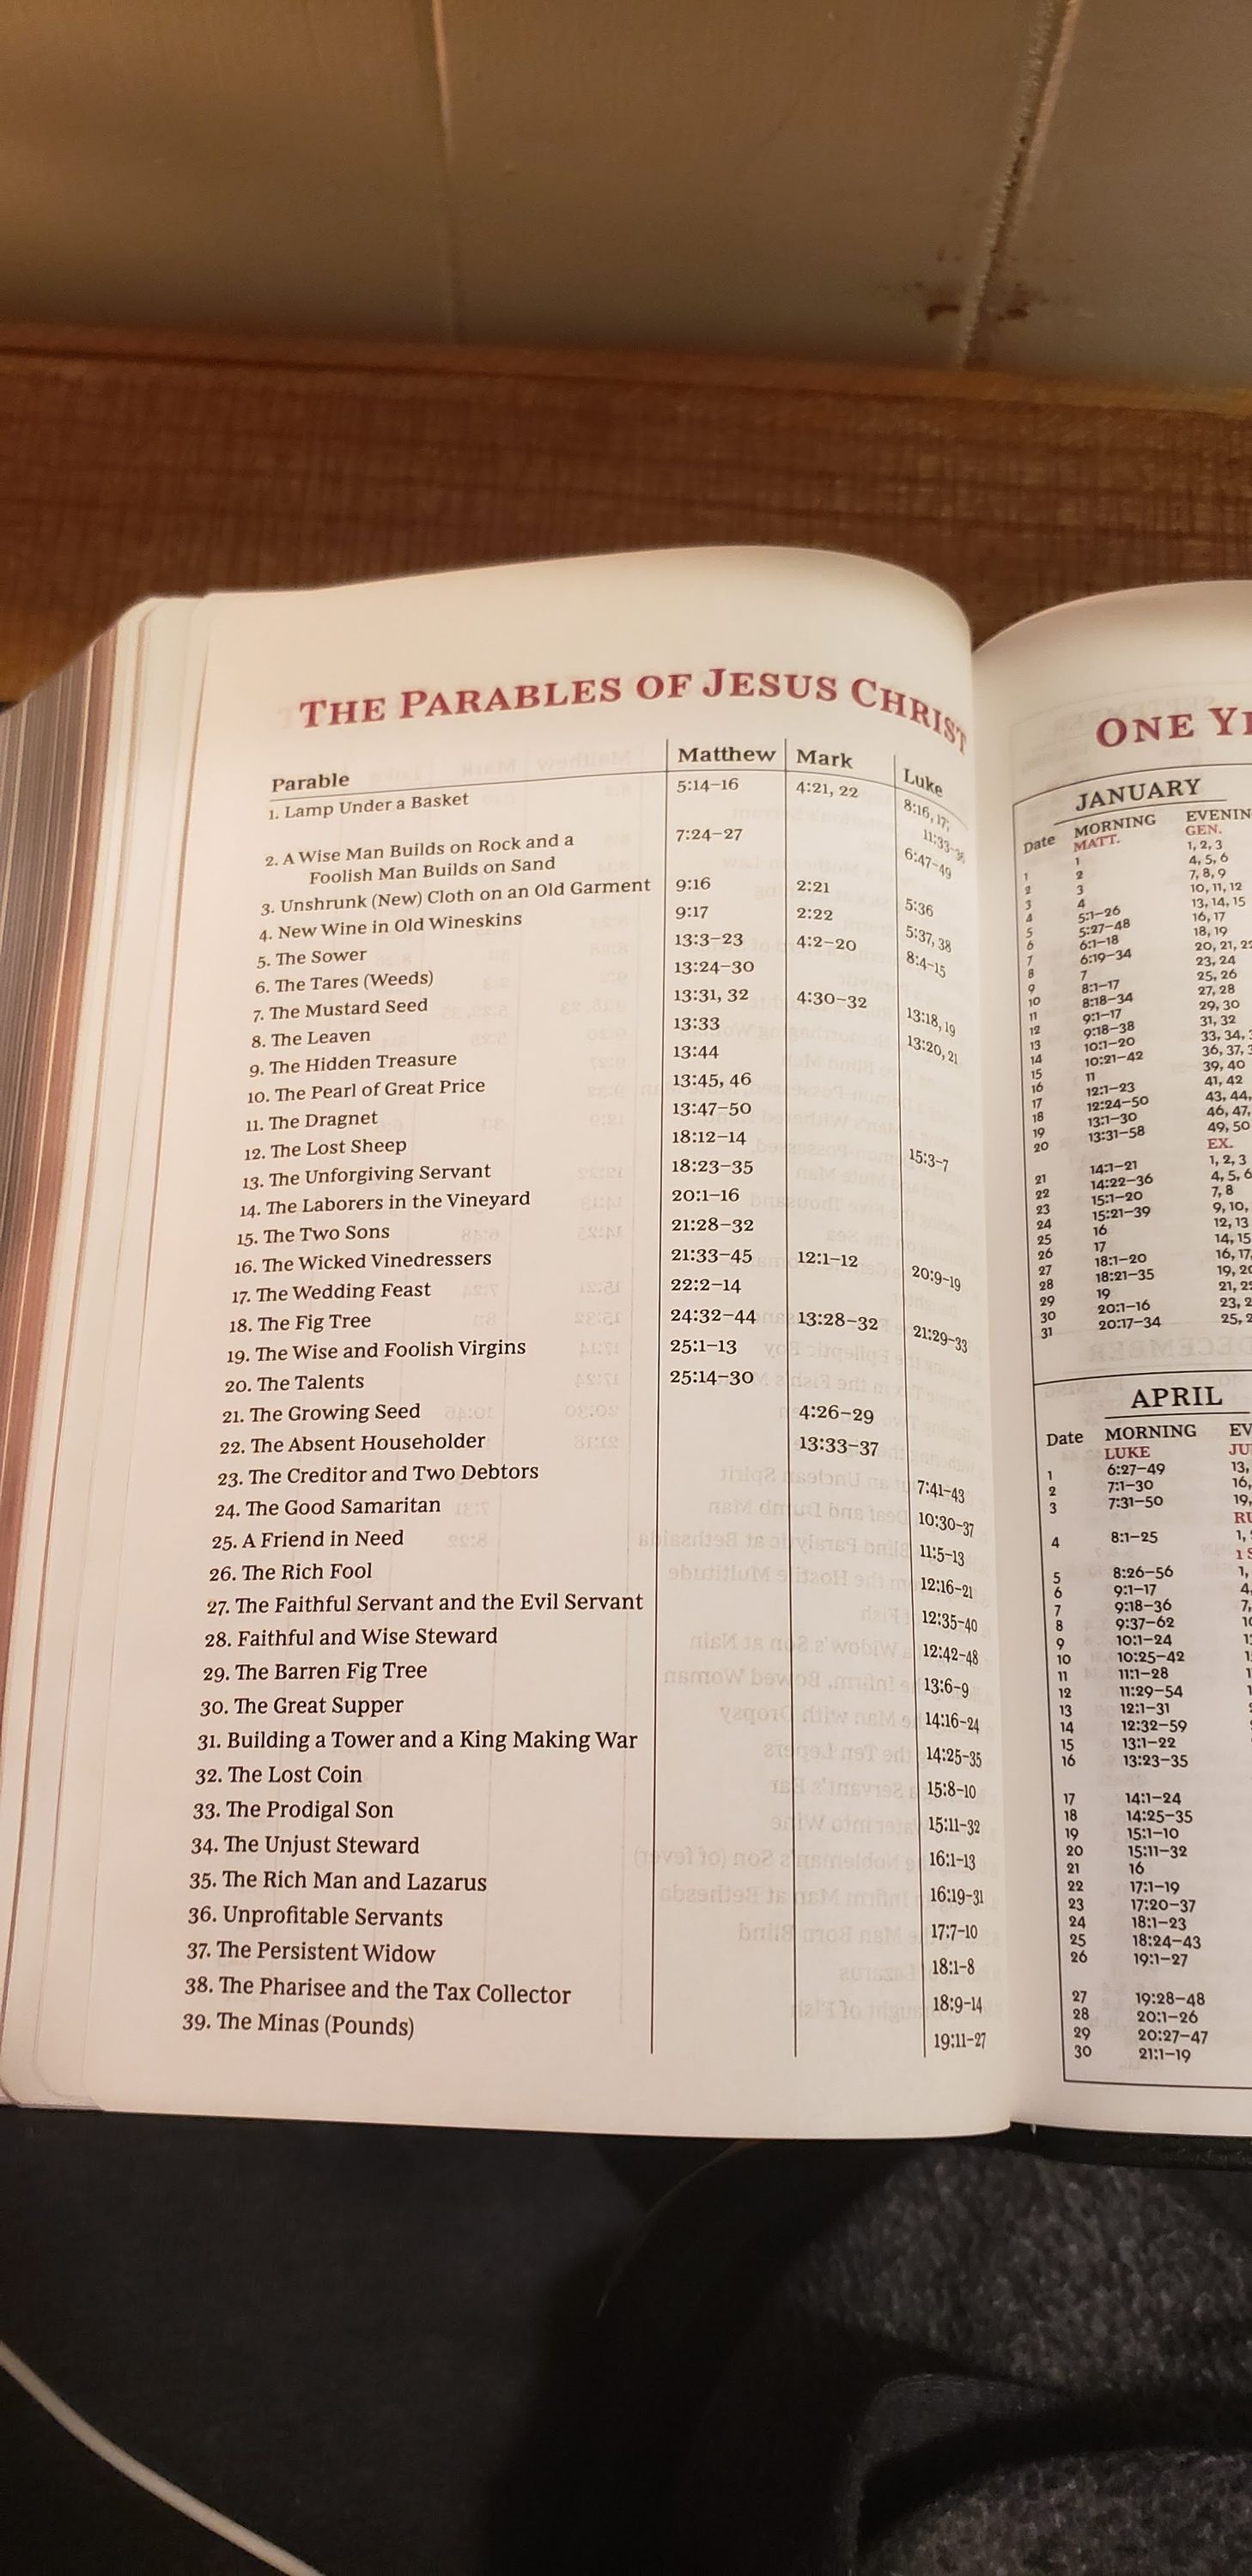 Showing the Parables of Jesus and a one year reading plan